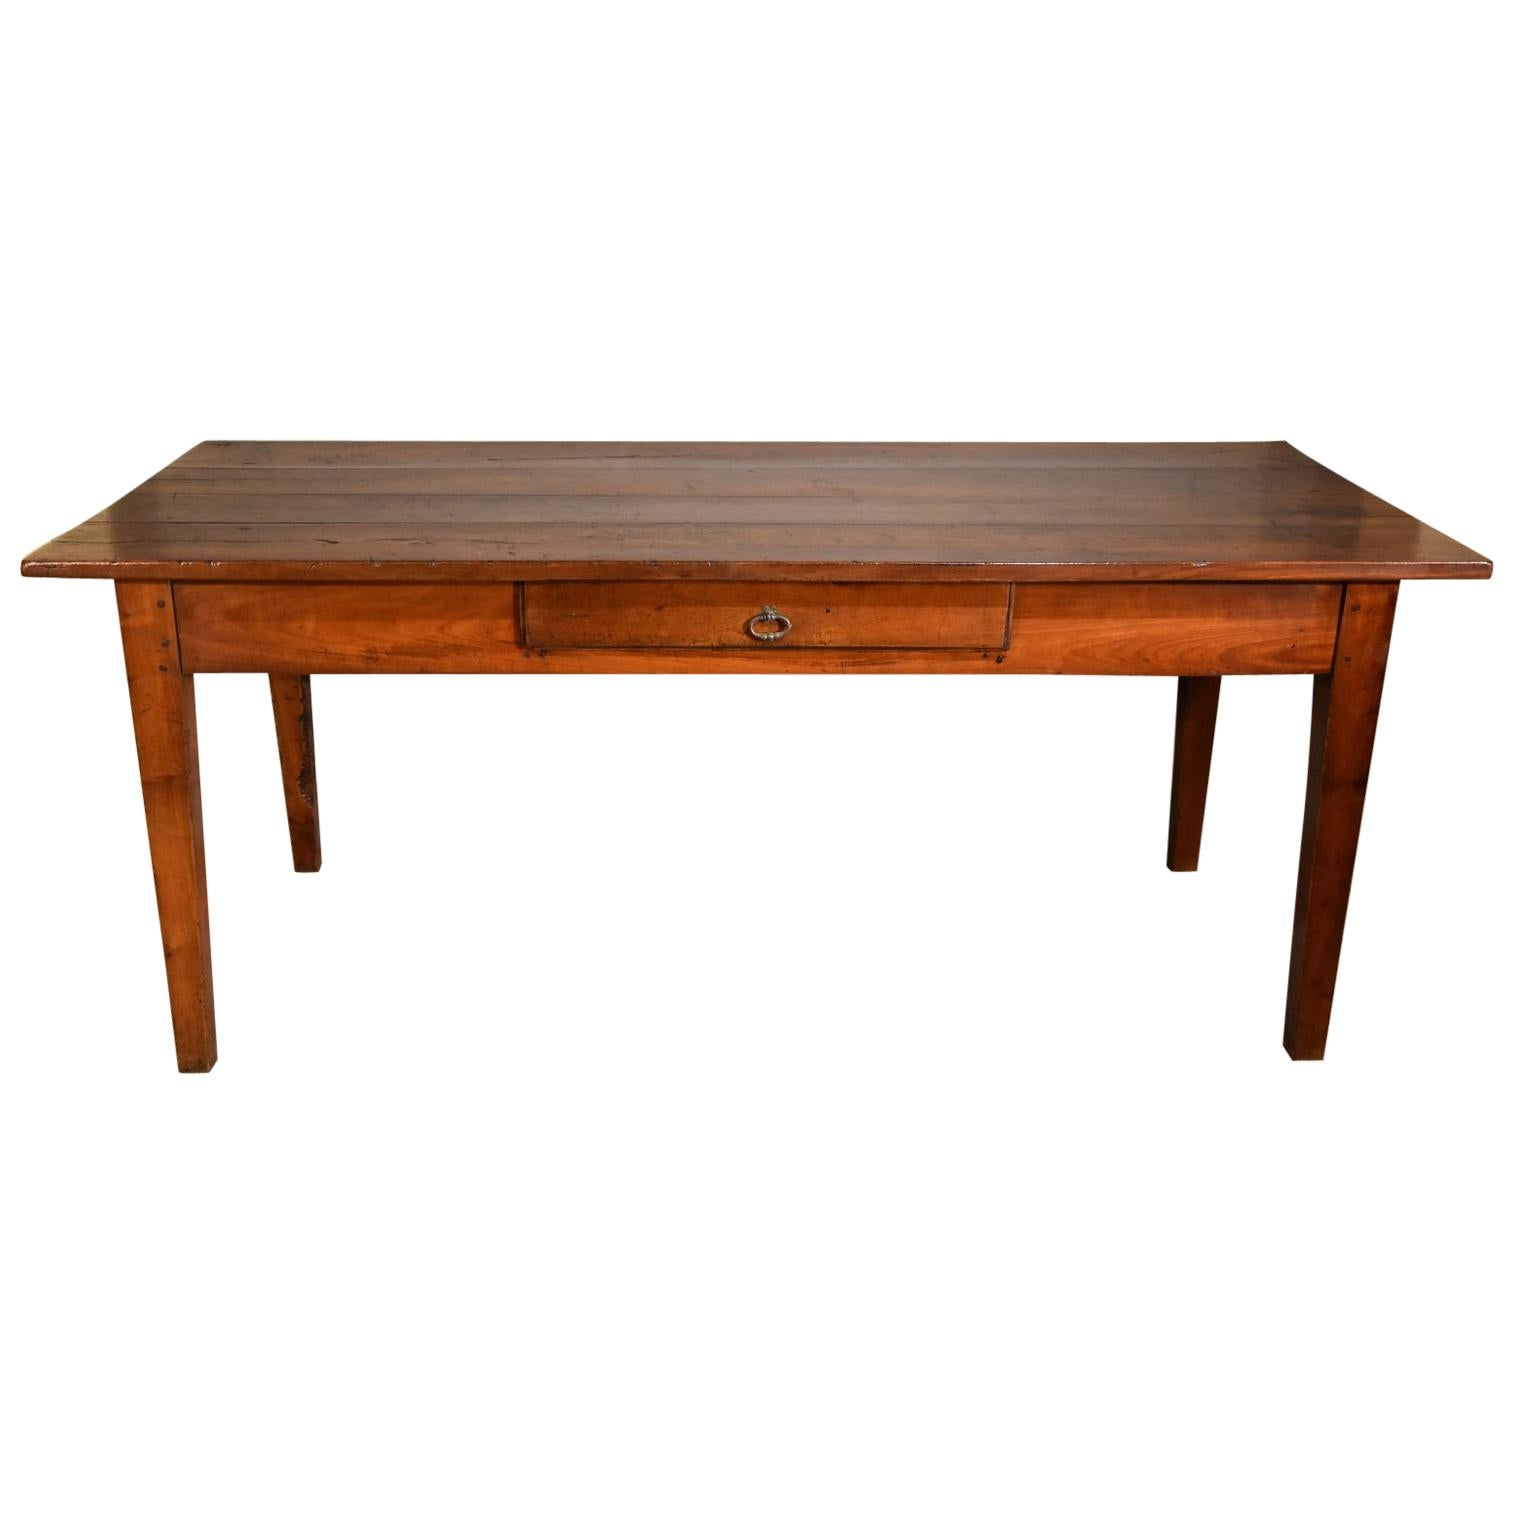 Lovely Mid-19th Century French Cherry Wood Farmhouse Table For Sale